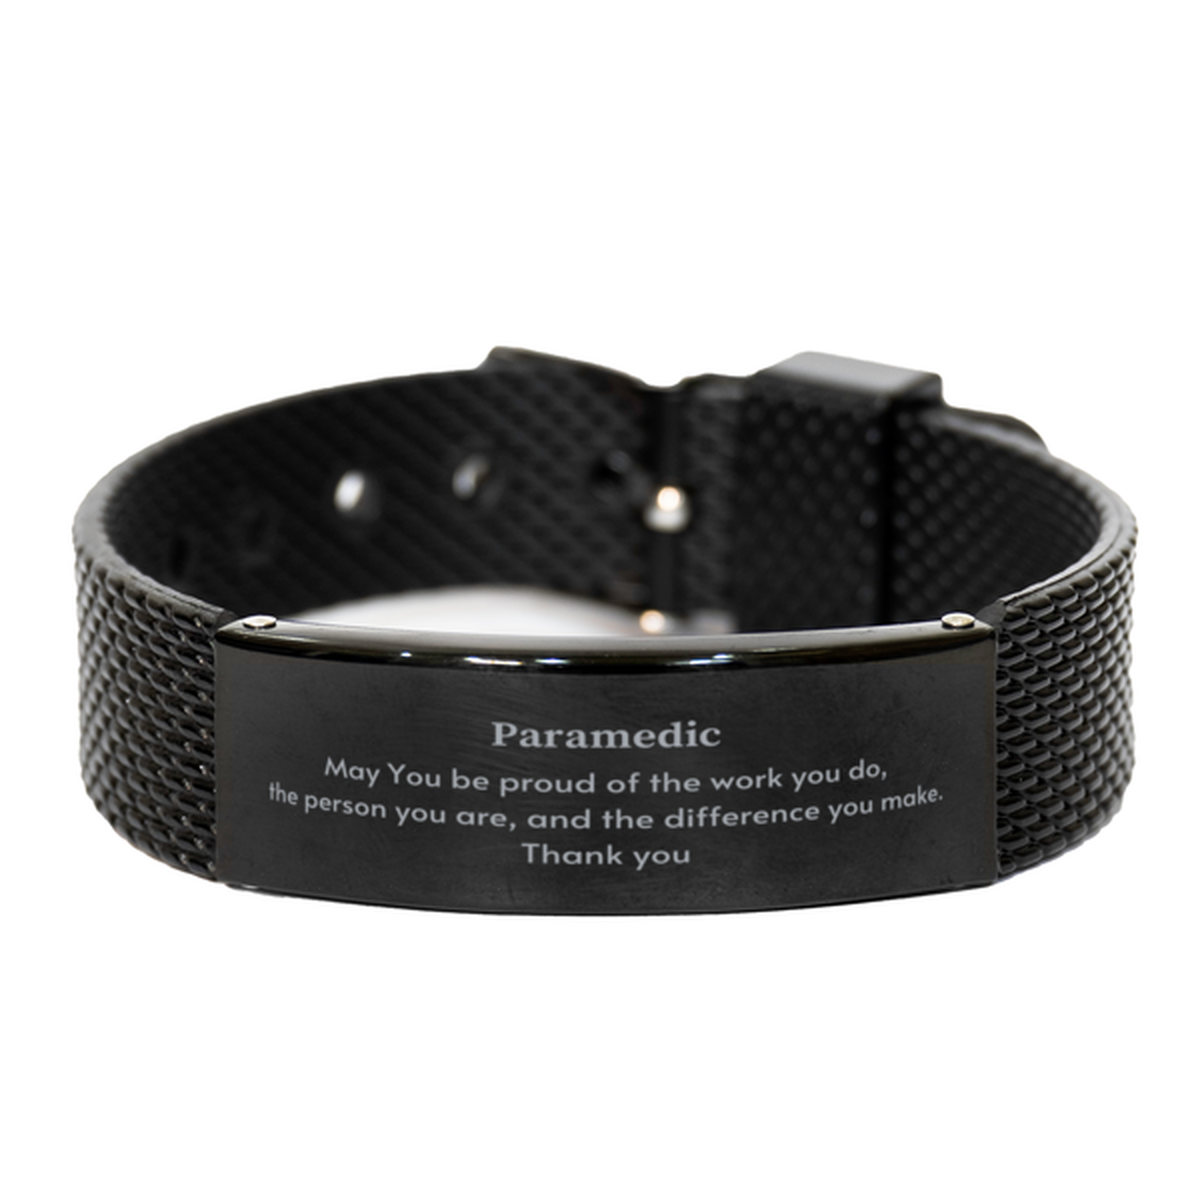 Heartwarming Black Shark Mesh Bracelet Retirement Coworkers Gifts for Paramedic, Paramedic May You be proud of the work you do, the person you are Gifts for Boss Men Women Friends